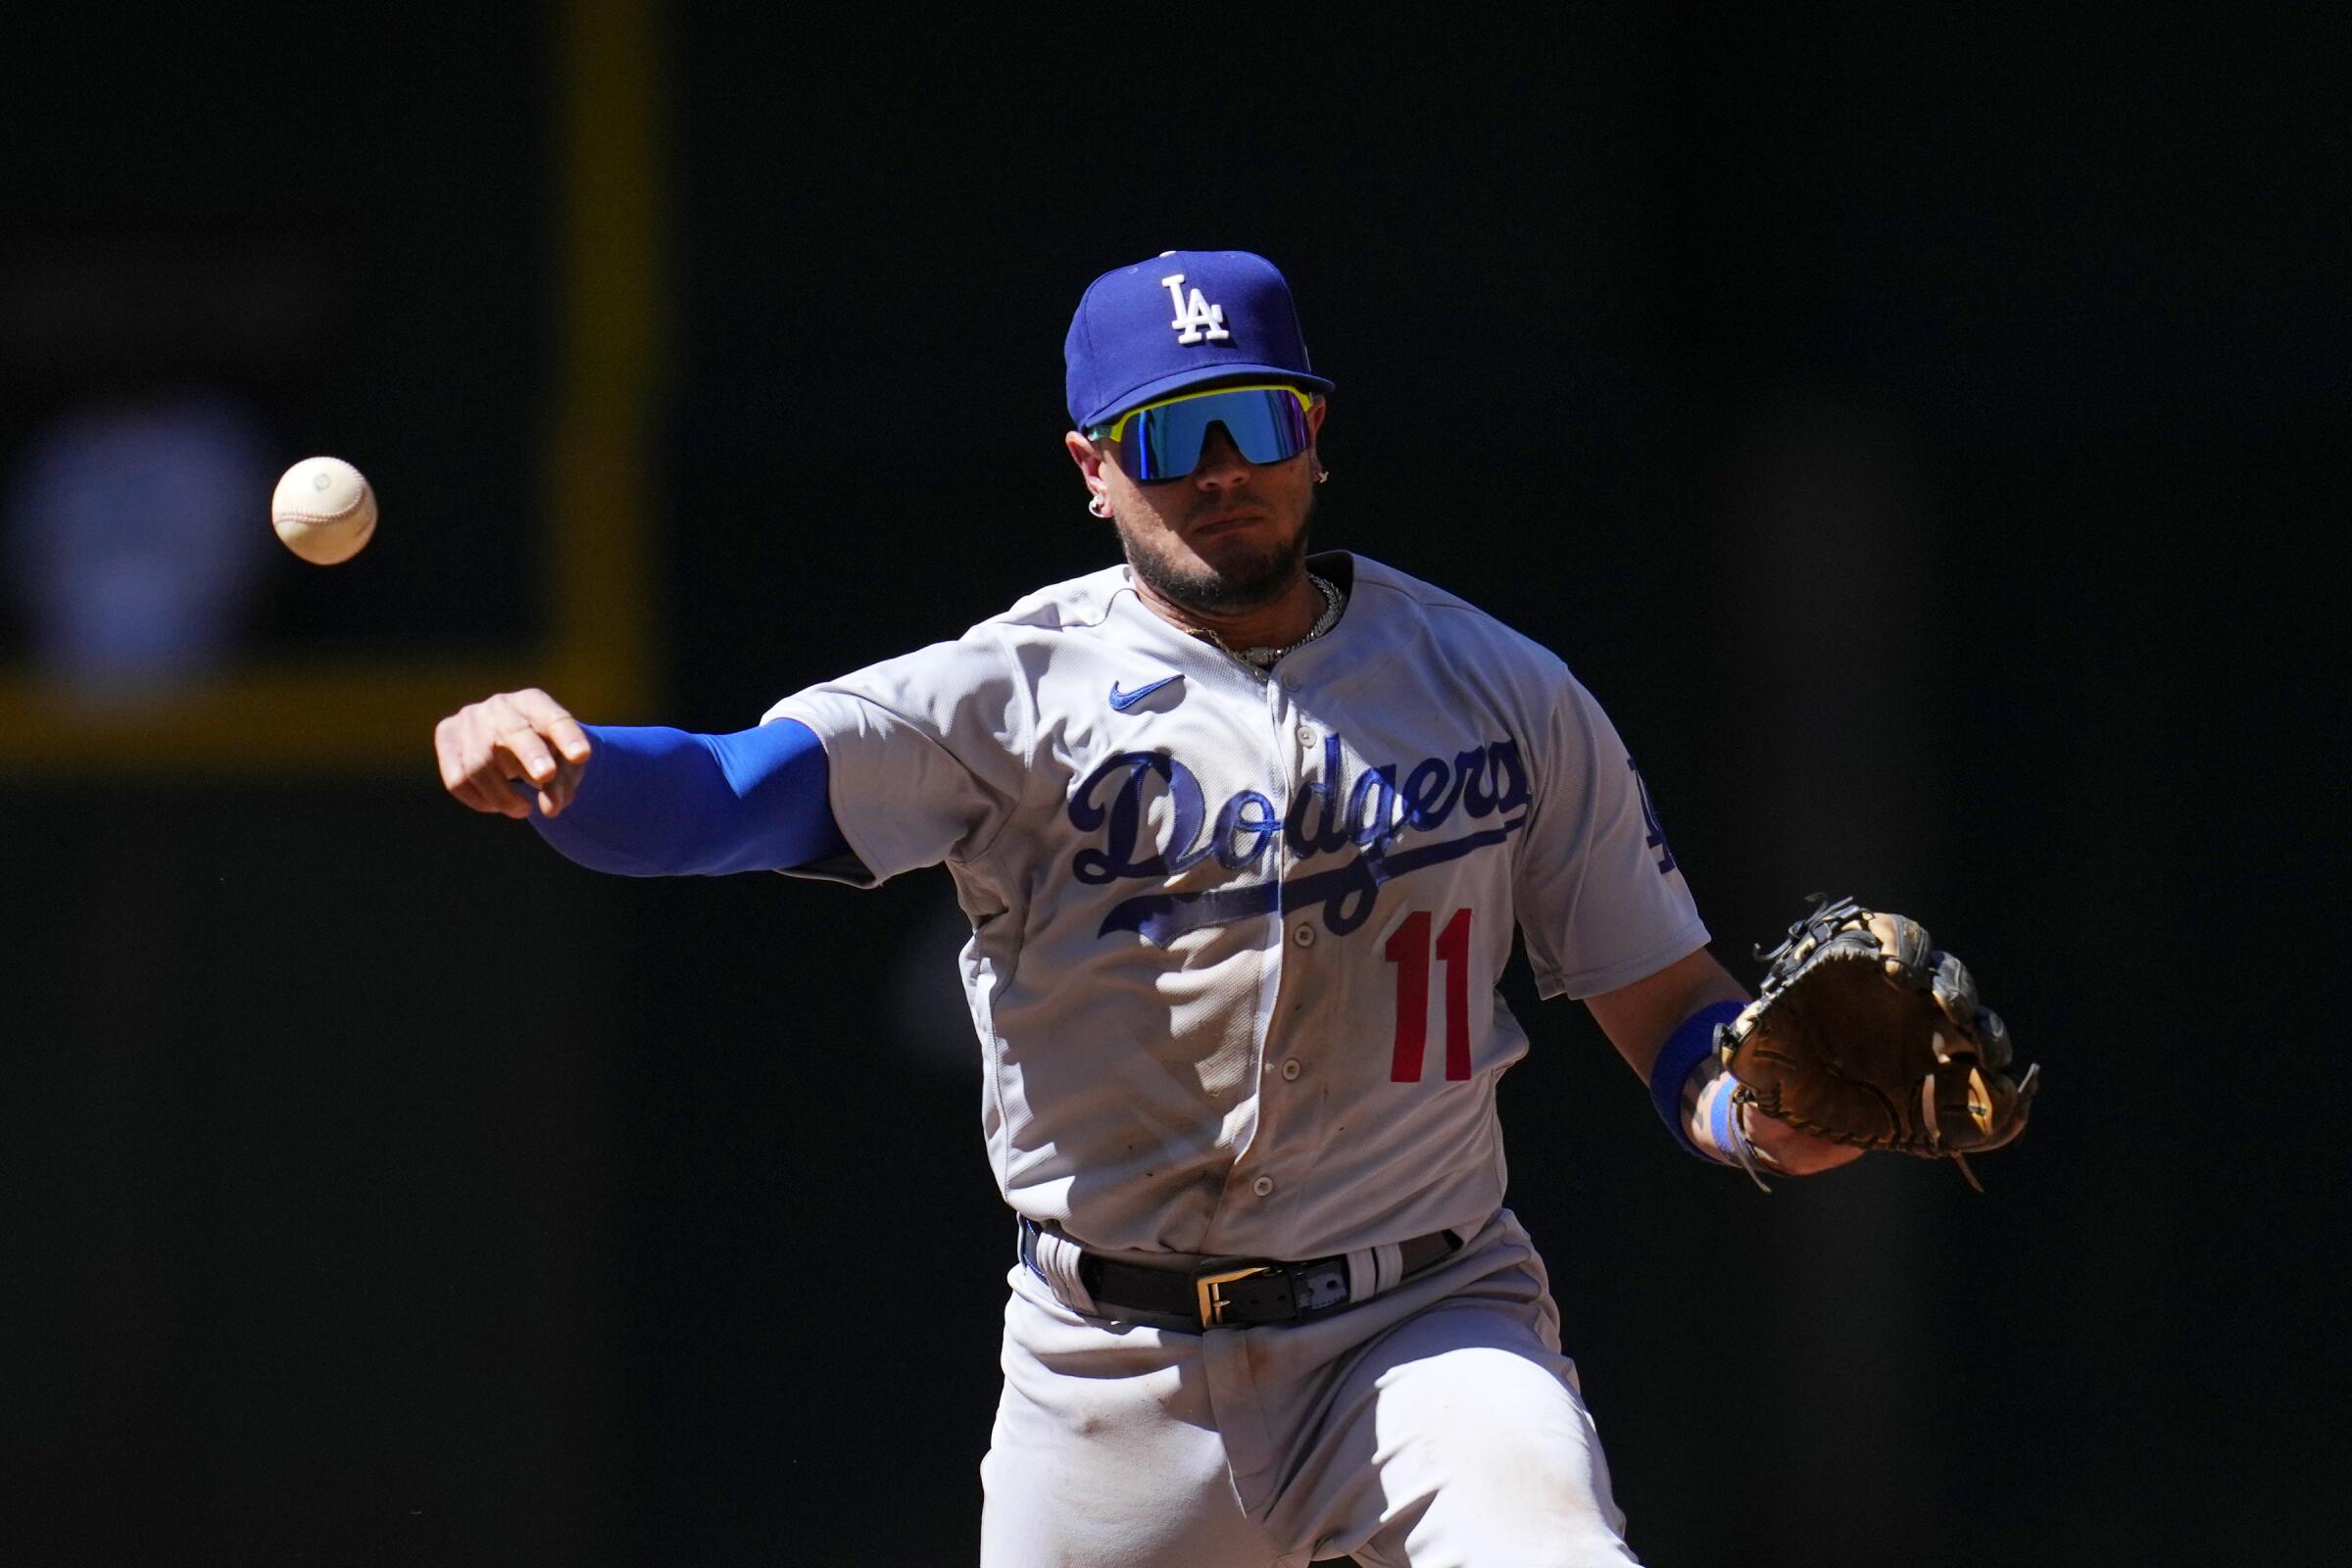 Dodgers shortstop Miguel Rojas throws to first base during a loss to the Arizona Diamondbacks.